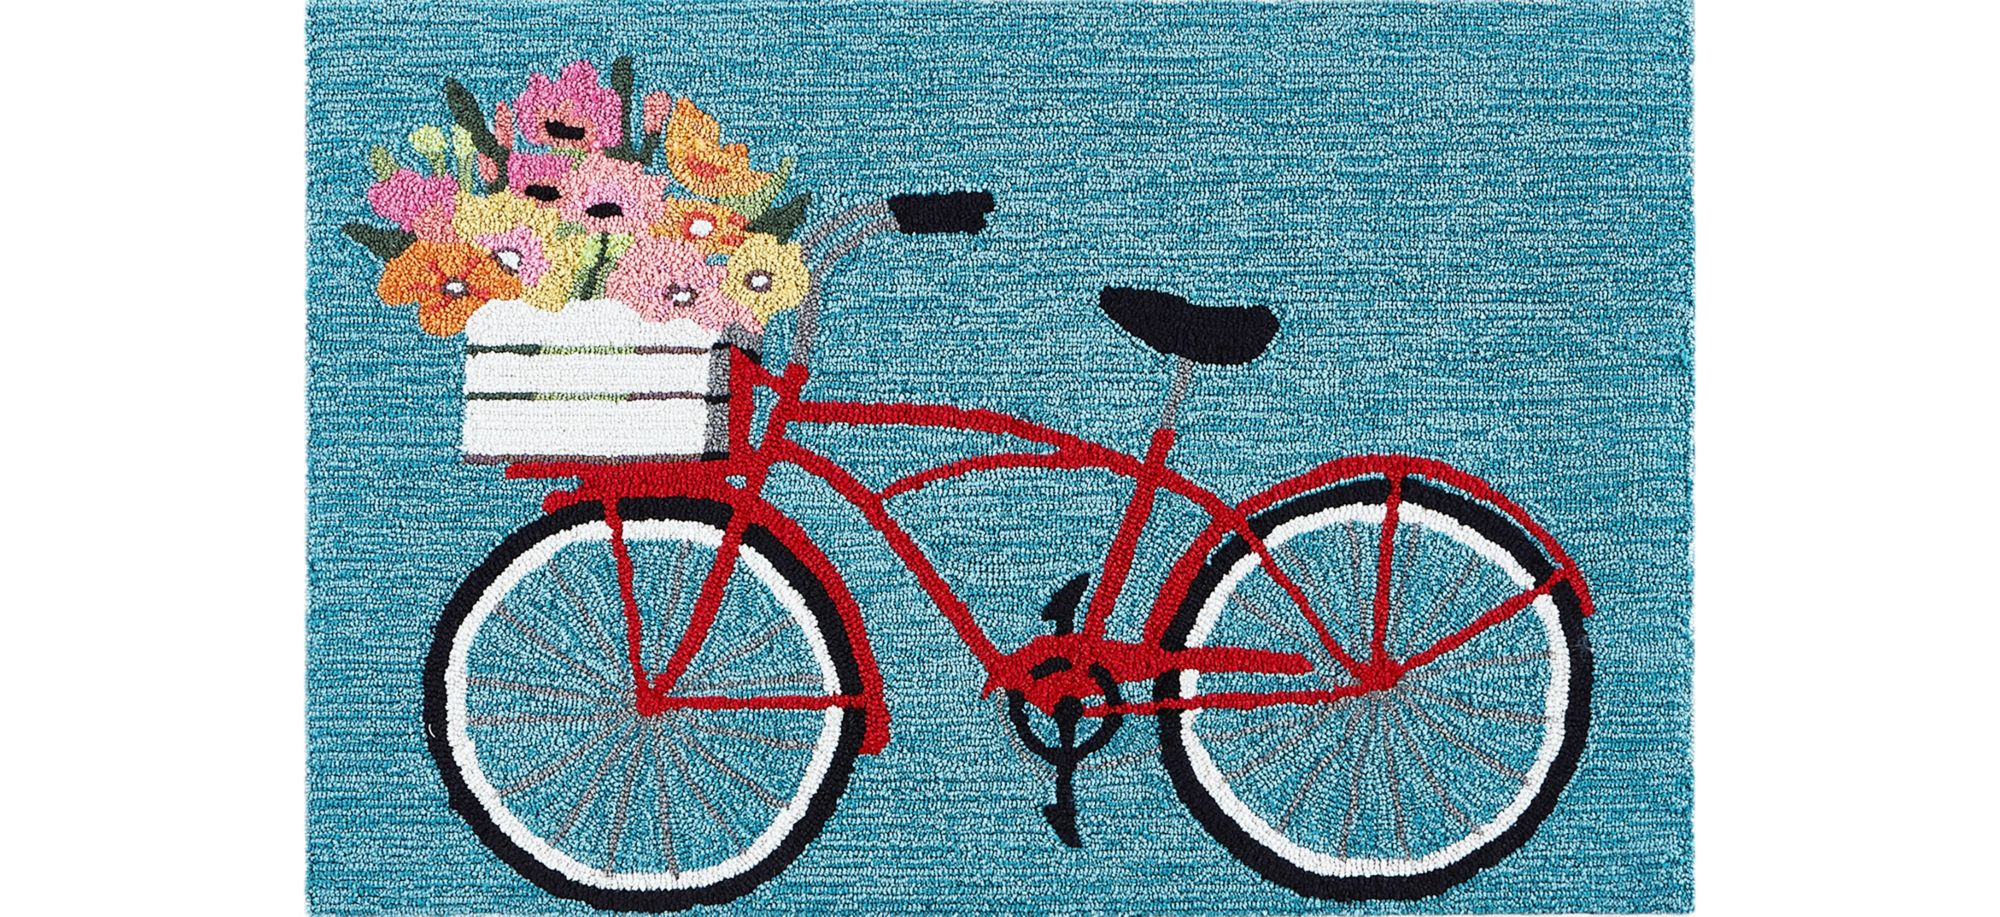 Liora Manne Bike Ride Front Porch Rug in Blue by Trans-Ocean Import Co Inc